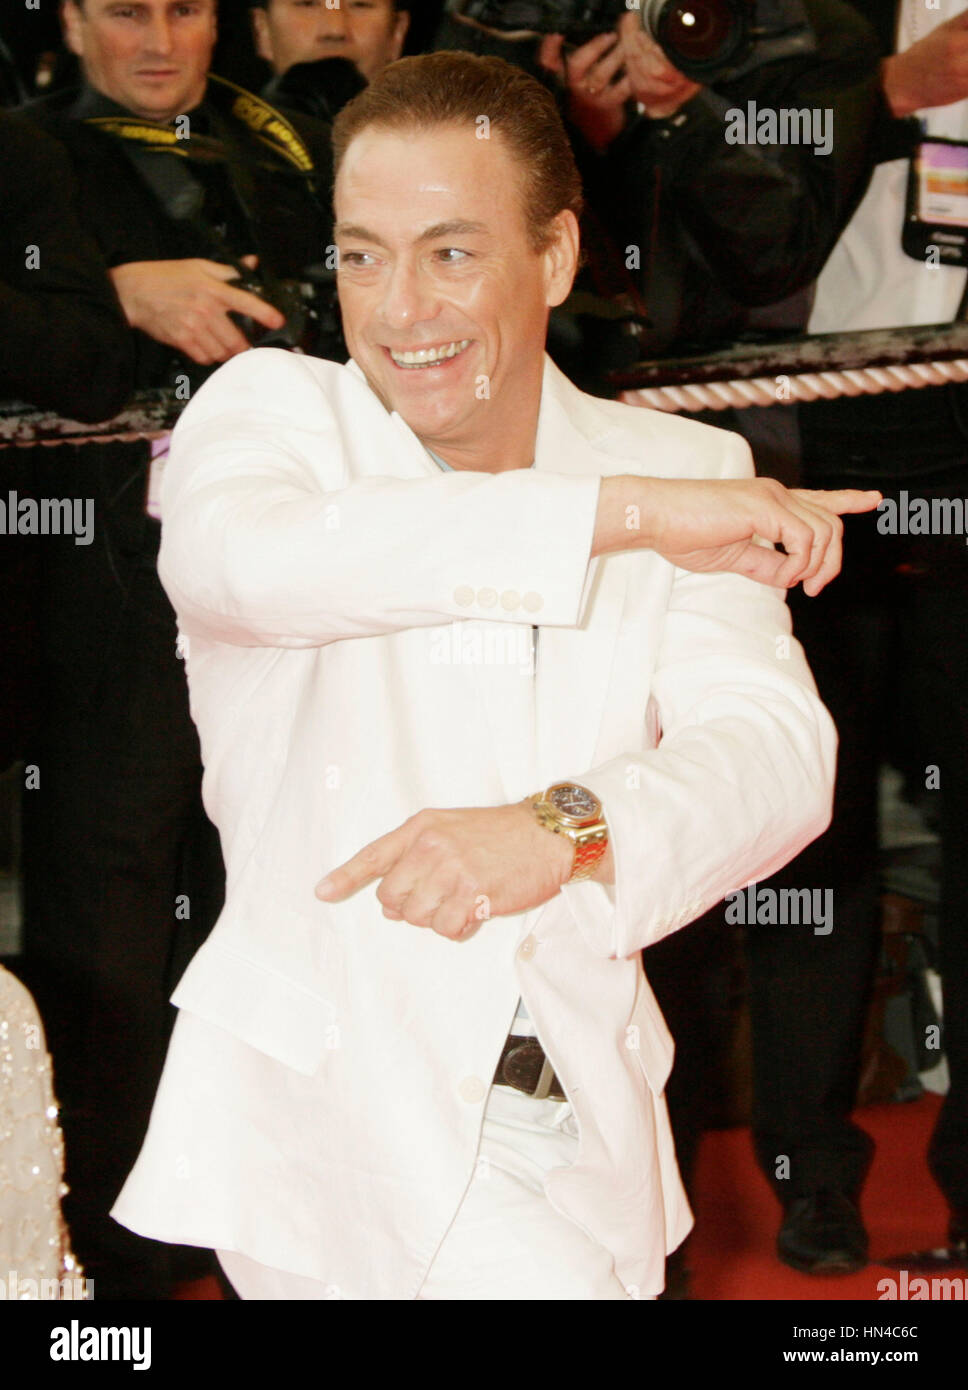 Jean Claude Van Damme arrives at the Un Conte De Noel premiere at the Palais des Festivals during the 61st Cannes International Film Festival on May 16, 2008 in Cannes, France. Photo by Francis Specker Stock Photo